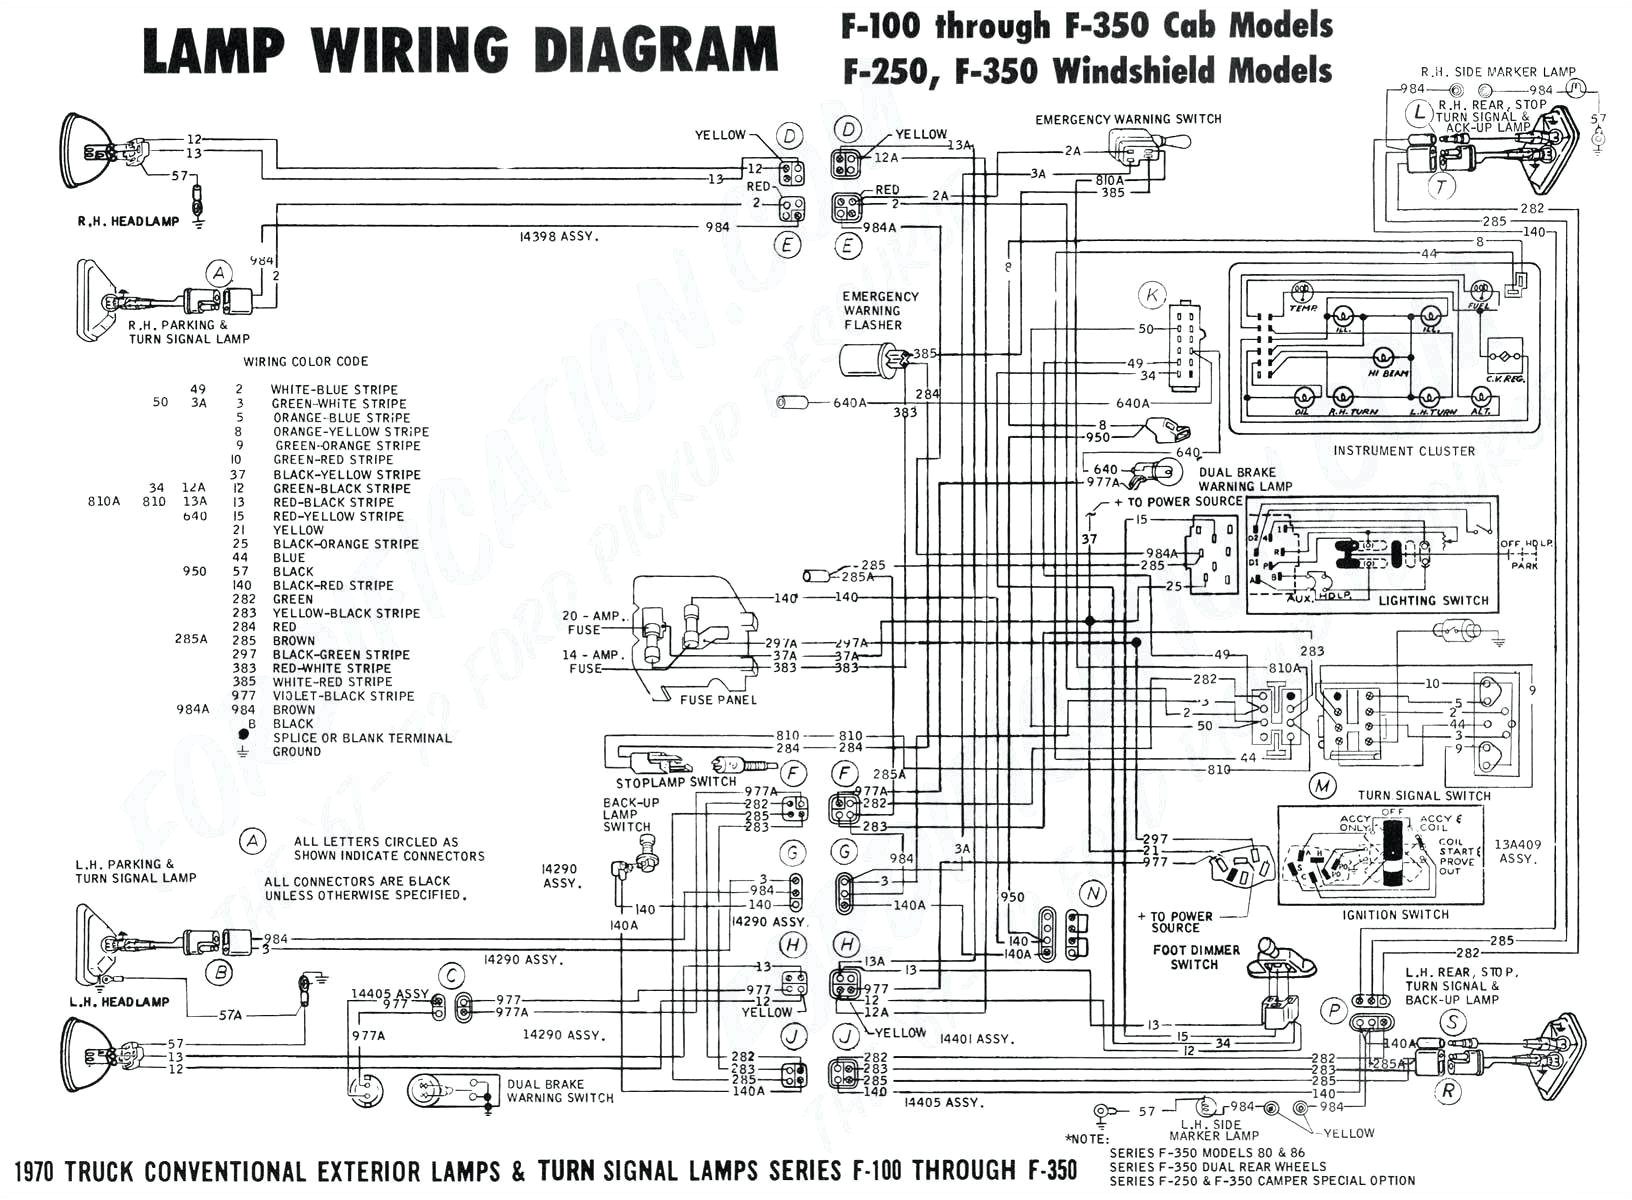 2002 ford f150 trailer wiring harness download wiring diagram ford f150 trailer lights truck best